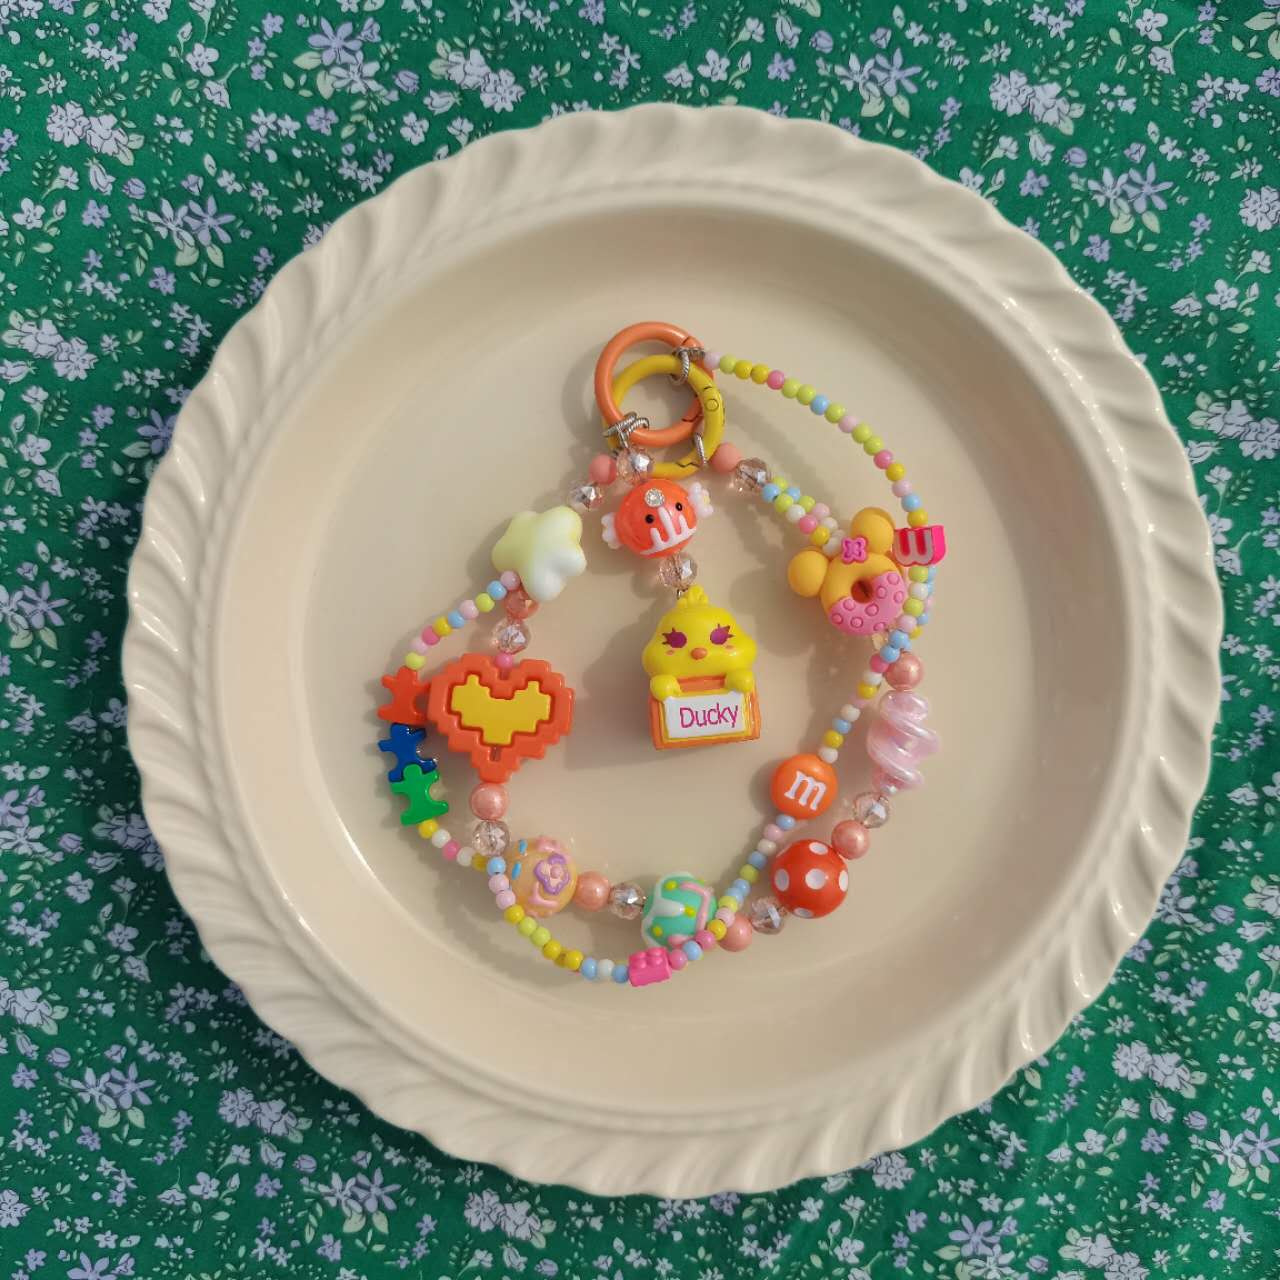 An array of colorful, handmade accessory beads spread out on a white plate